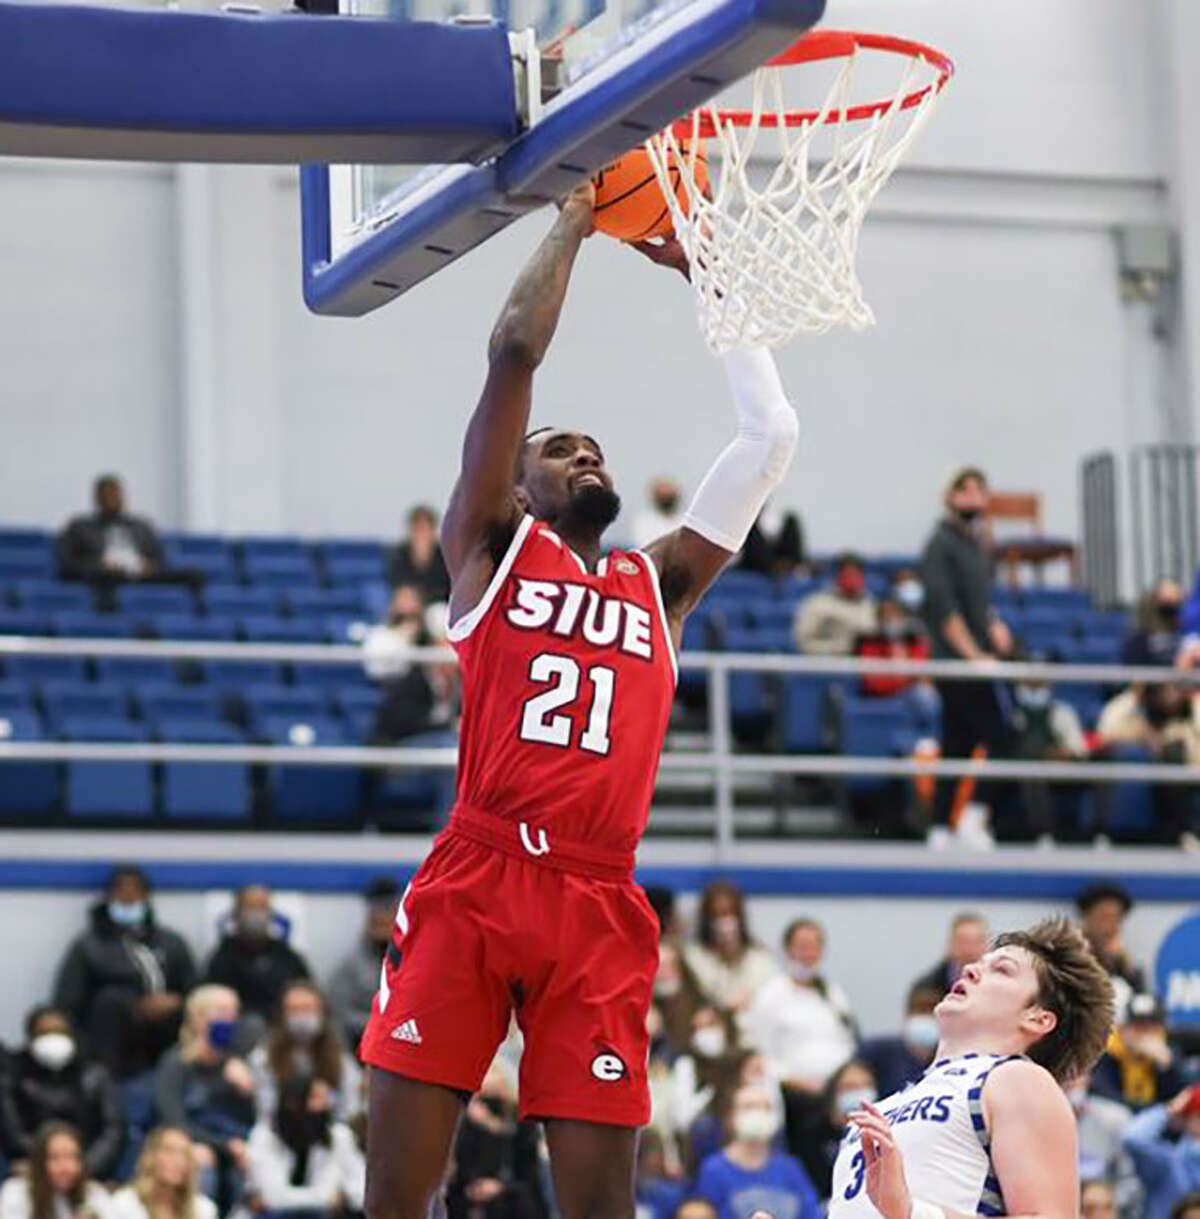 SIUE's Shaun Doss Jr. (21) goes up to score in Thursday's win over Eastern Illinois at Lantz Arena in Charleston.